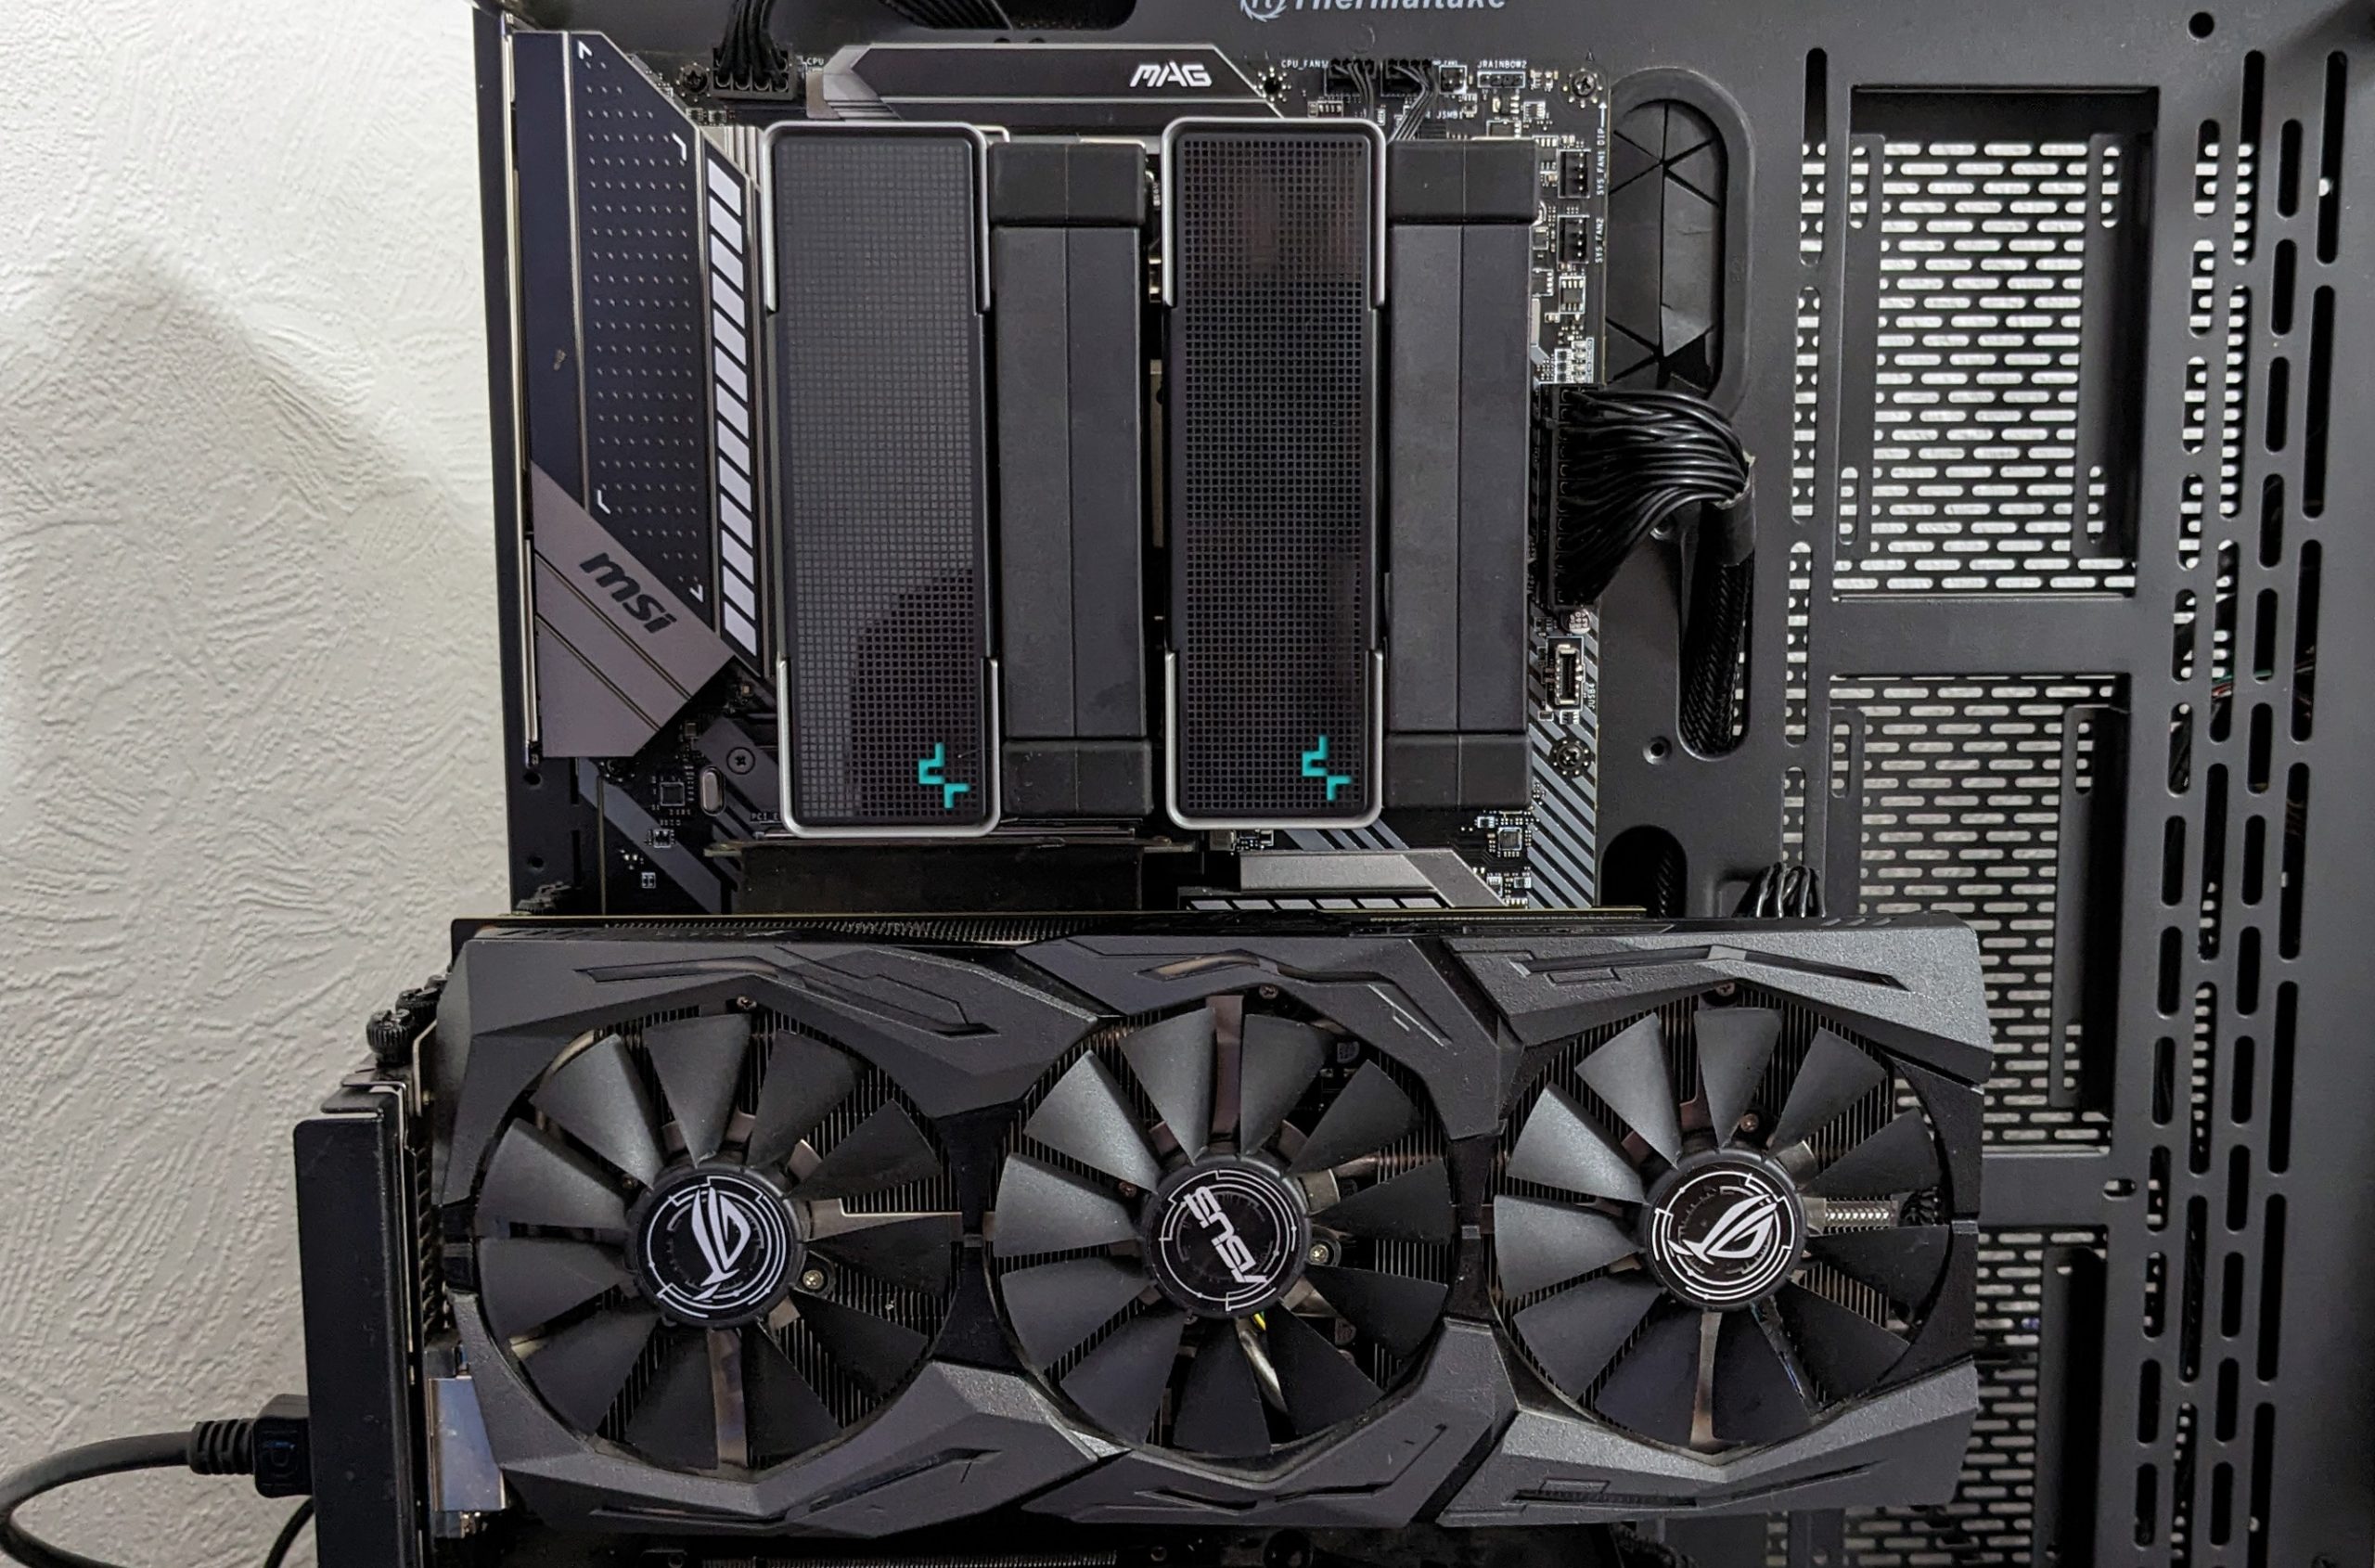 DeepCool AK620 Review - AMD Test System & Temperature Results